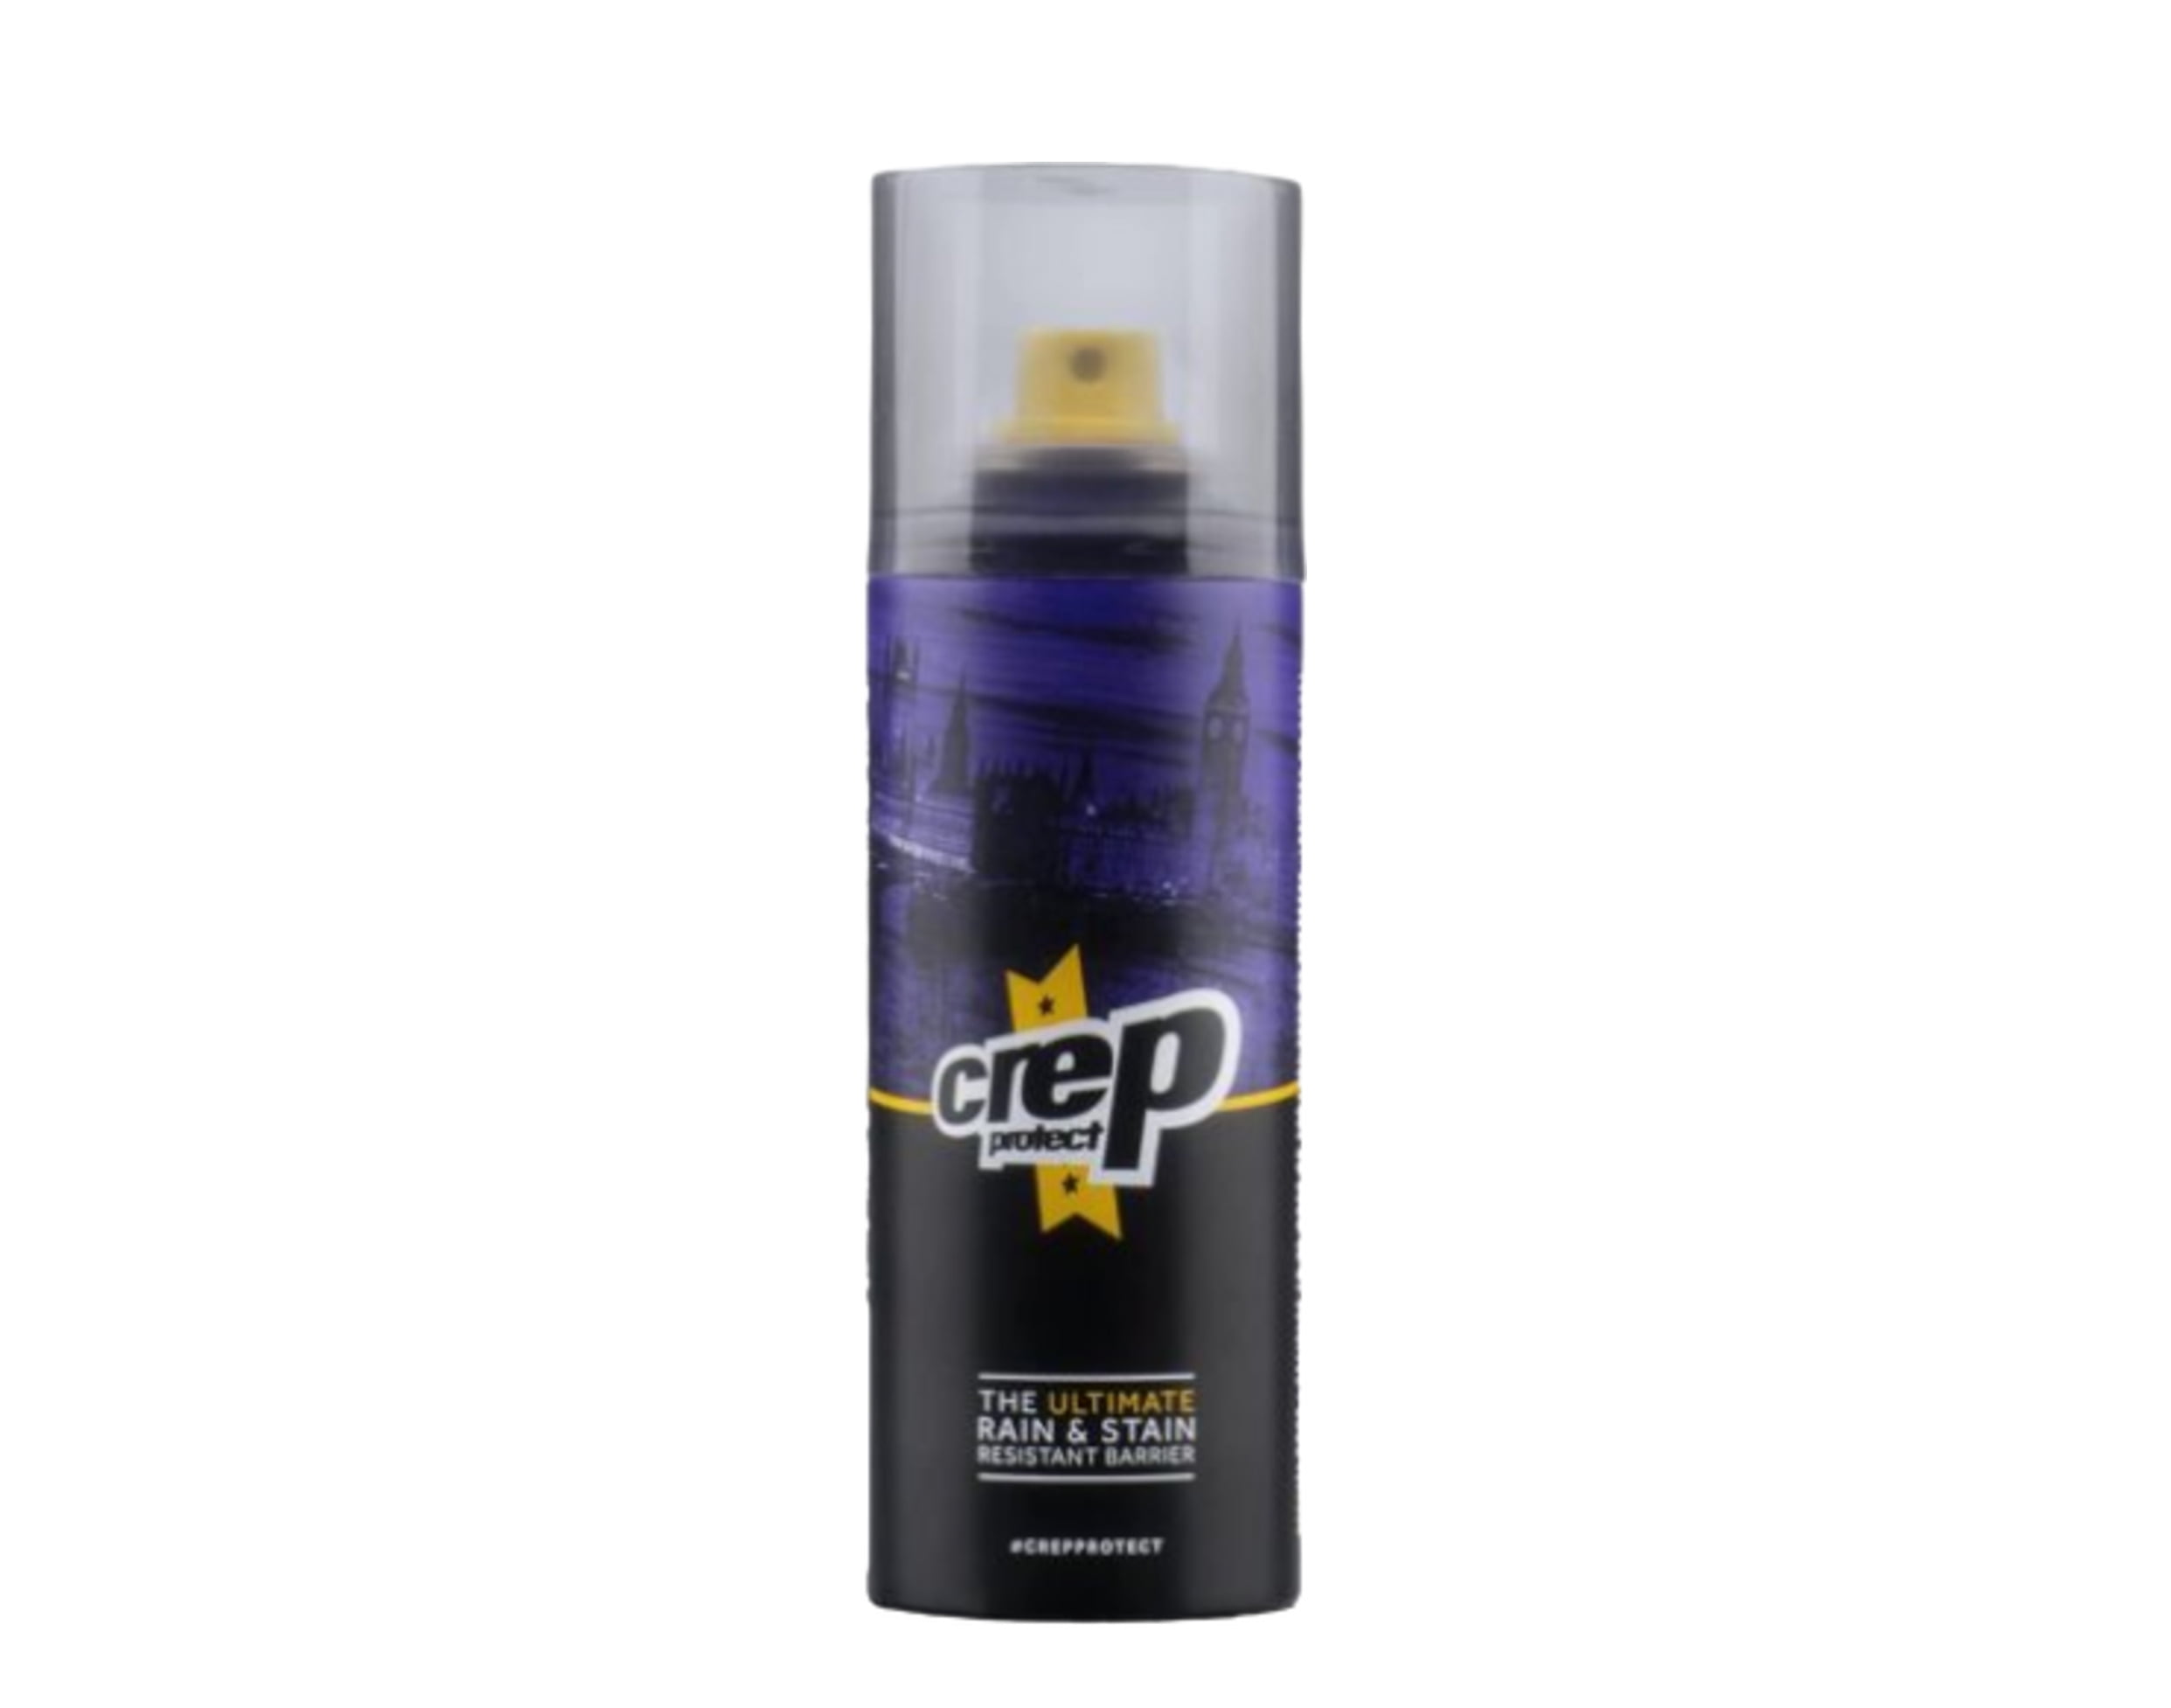 Crep Protect The Ultimate Rain Stain Resistant Barrier